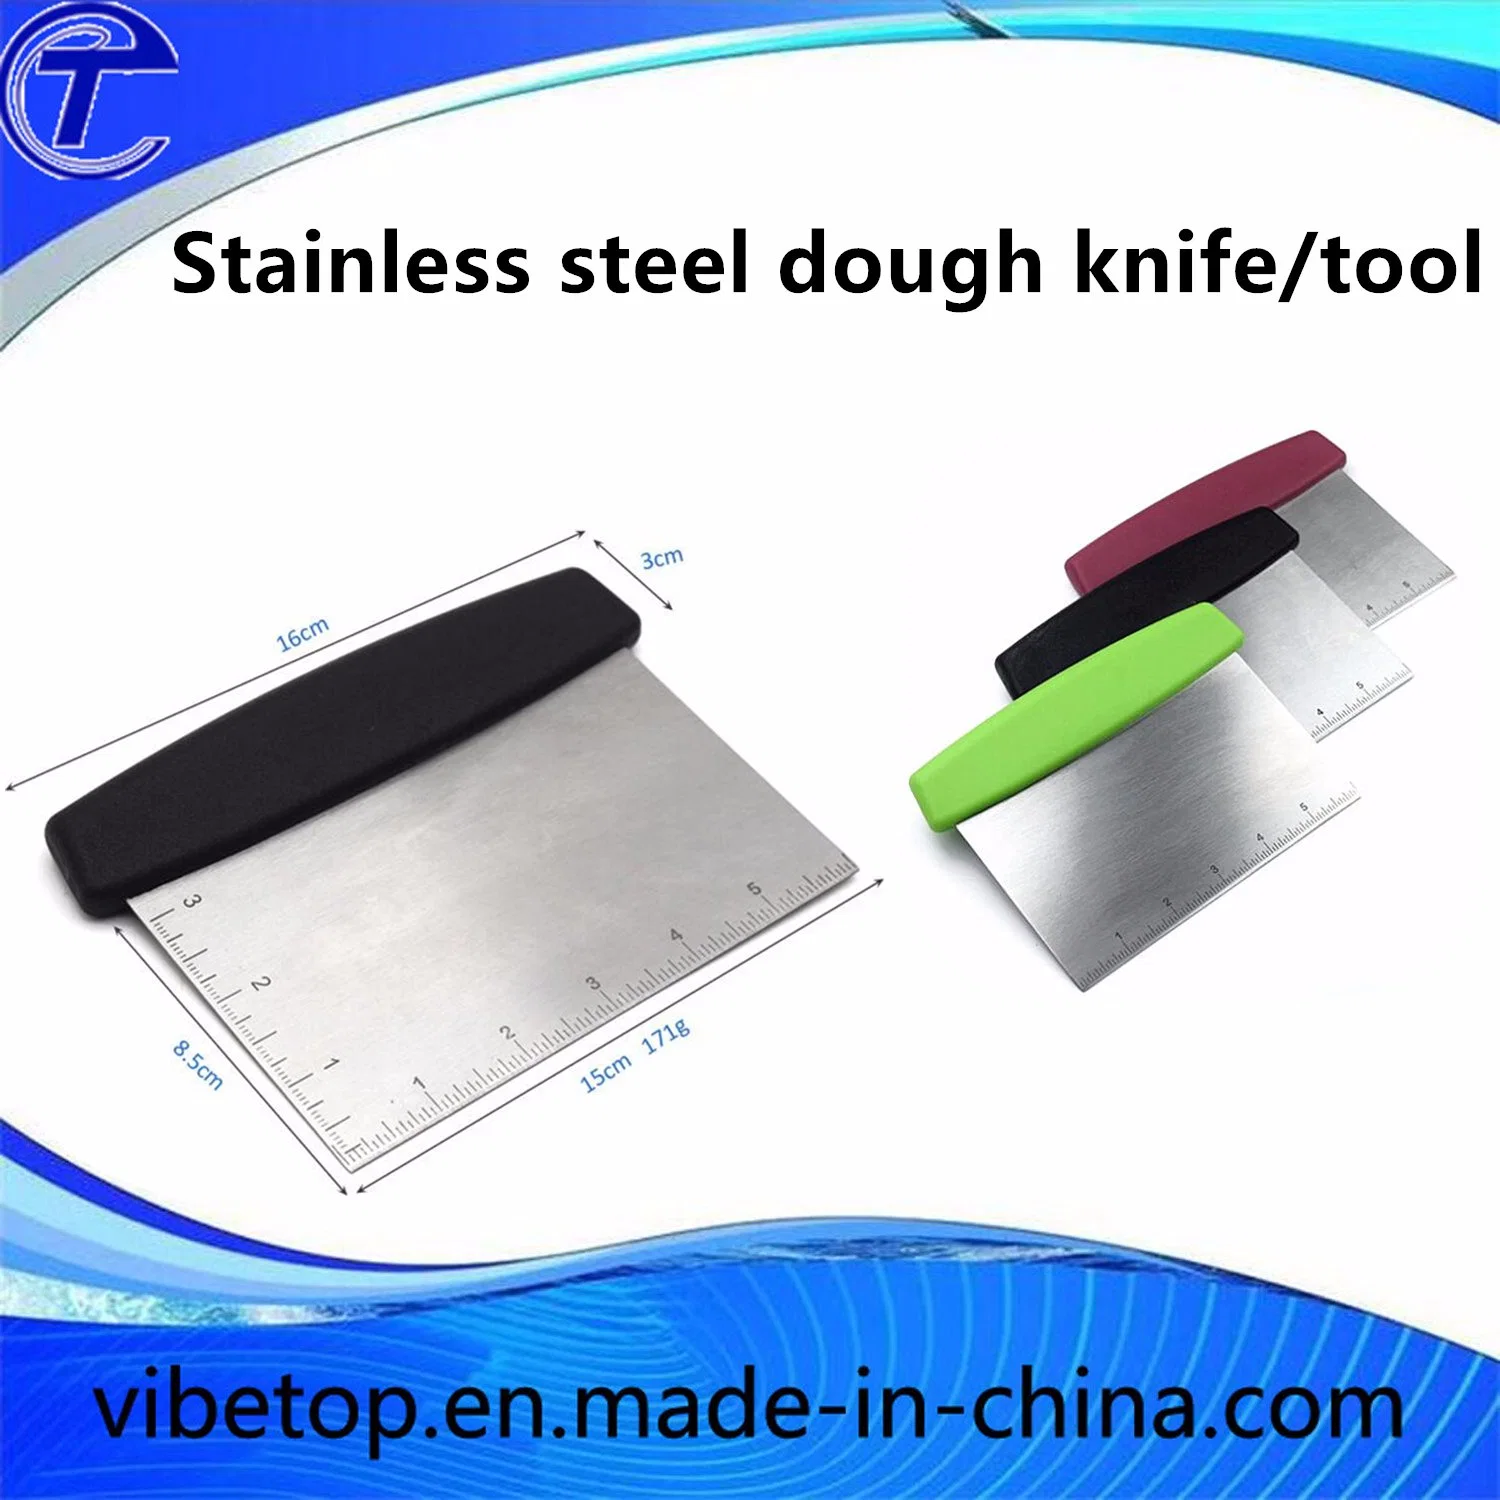 Wholesale/Supplier Cheaper Stainless Steel Durable Pizza Dough Scraper/Knife